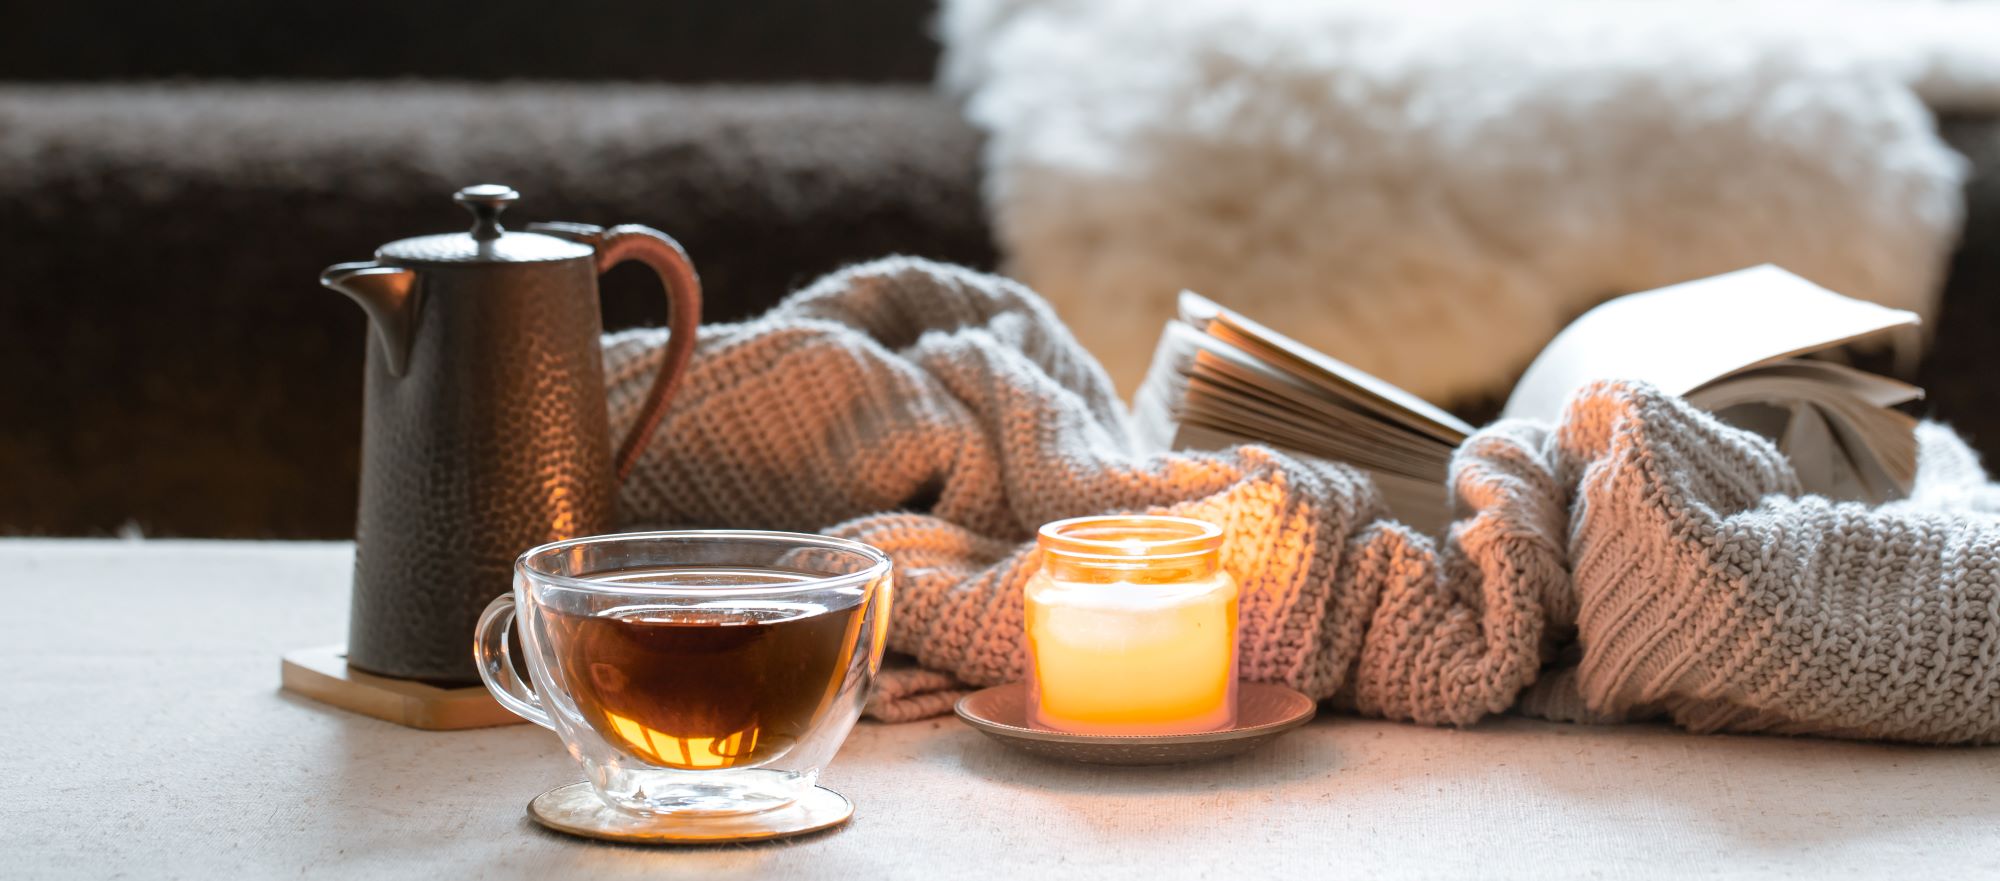 A cozy atmosphere showing a book, tea, and a lit scented candle